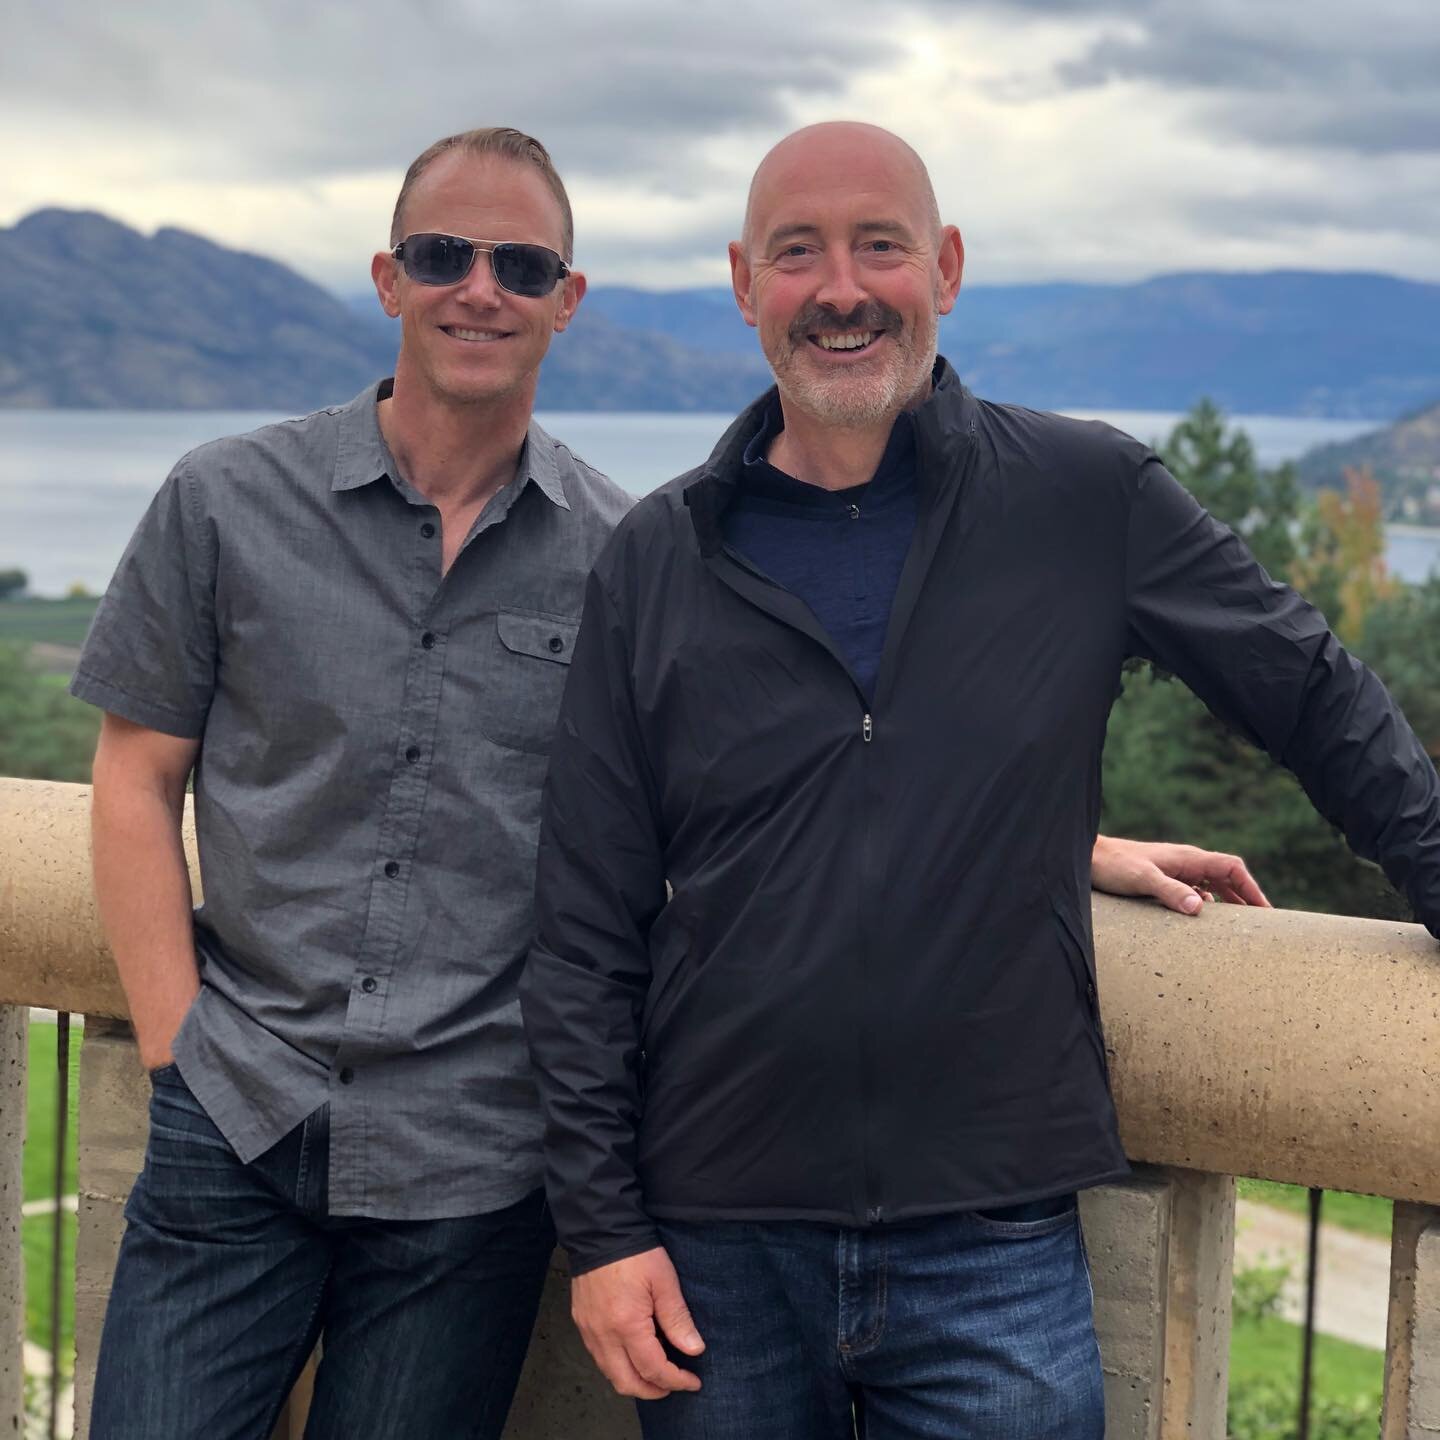 The dynamic duo reunited in their homeland 🇨🇦 .
.
.
#missionhillswinery #yci #younghusbandconsulting #dynamicduo #kelowna #westkelowna #canada #canadians #firelifesafety #firesafetyengineering #firecodeenforcement #bondingtime #teambuilding